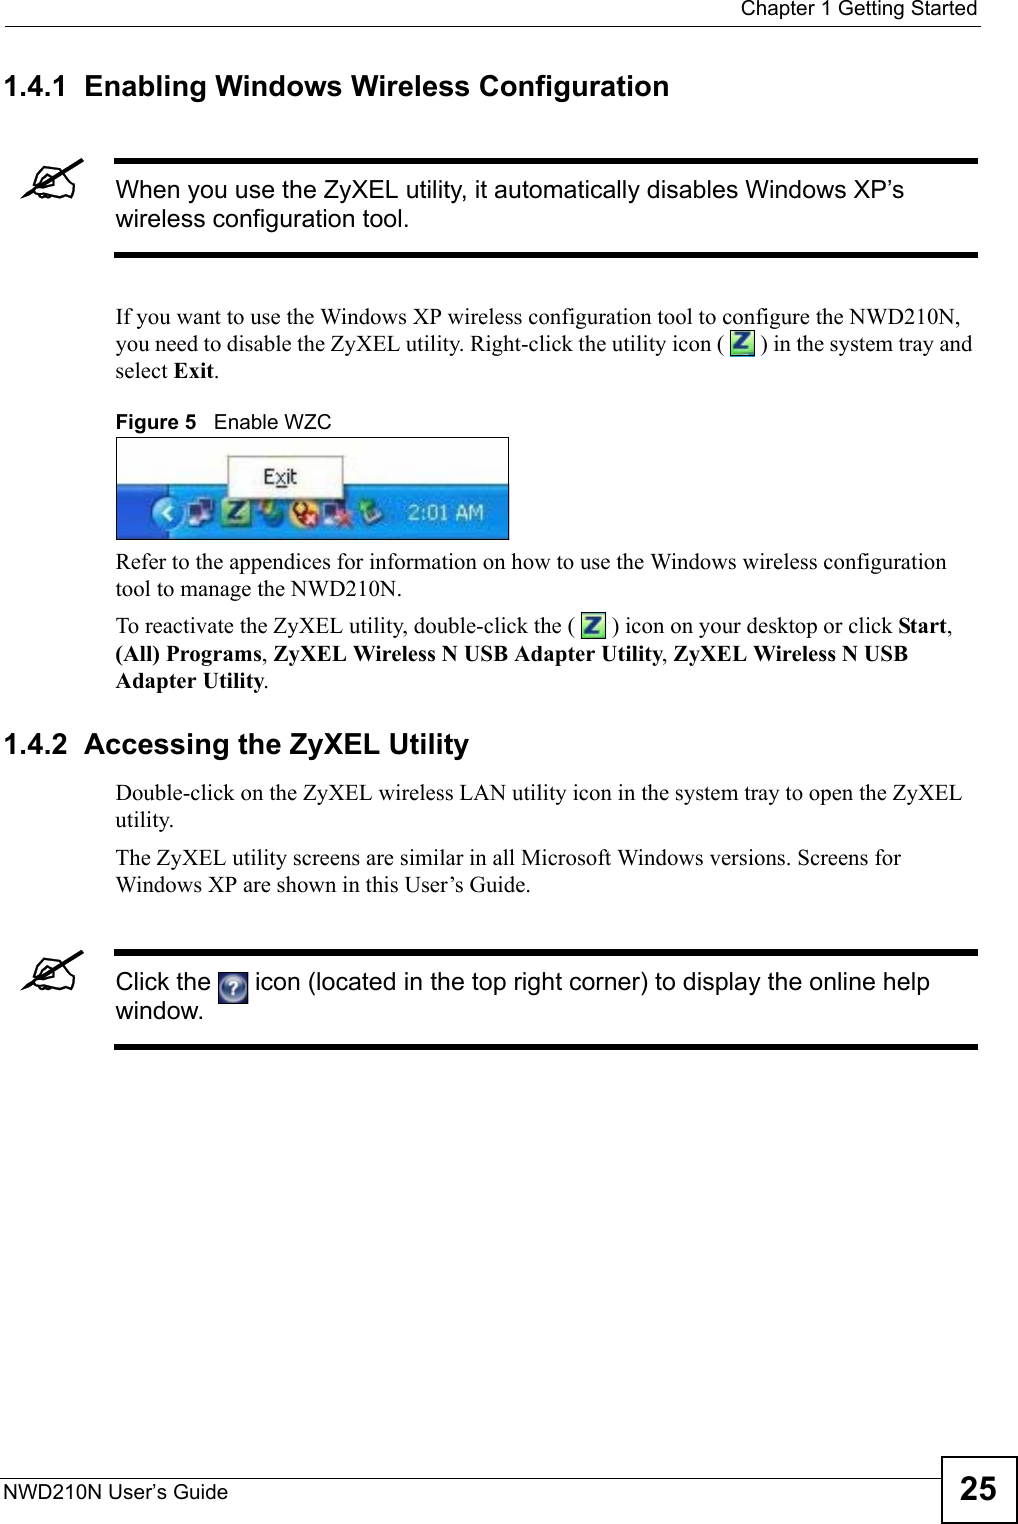  Chapter 1 Getting StartedNWD210N User’s Guide 251.4.1  Enabling Windows Wireless Configuration &quot;When you use the ZyXEL utility, it automatically disables Windows XP’s wireless configuration tool. If you want to use the Windows XP wireless configuration tool to configure the NWD210N, you need to disable the ZyXEL utility. Right-click the utility icon (   ) in the system tray and select Exit. Figure 5   Enable WZCRefer to the appendices for information on how to use the Windows wireless configuration tool to manage the NWD210N.To reactivate the ZyXEL utility, double-click the (   ) icon on your desktop or click Start, (All) Programs, ZyXEL Wireless N USB Adapter Utility, ZyXEL Wireless N USB Adapter Utility.1.4.2  Accessing the ZyXEL Utility Double-click on the ZyXEL wireless LAN utility icon in the system tray to open the ZyXEL utility. The ZyXEL utility screens are similar in all Microsoft Windows versions. Screens for Windows XP are shown in this User’s Guide. &quot;Click the   icon (located in the top right corner) to display the online help window.